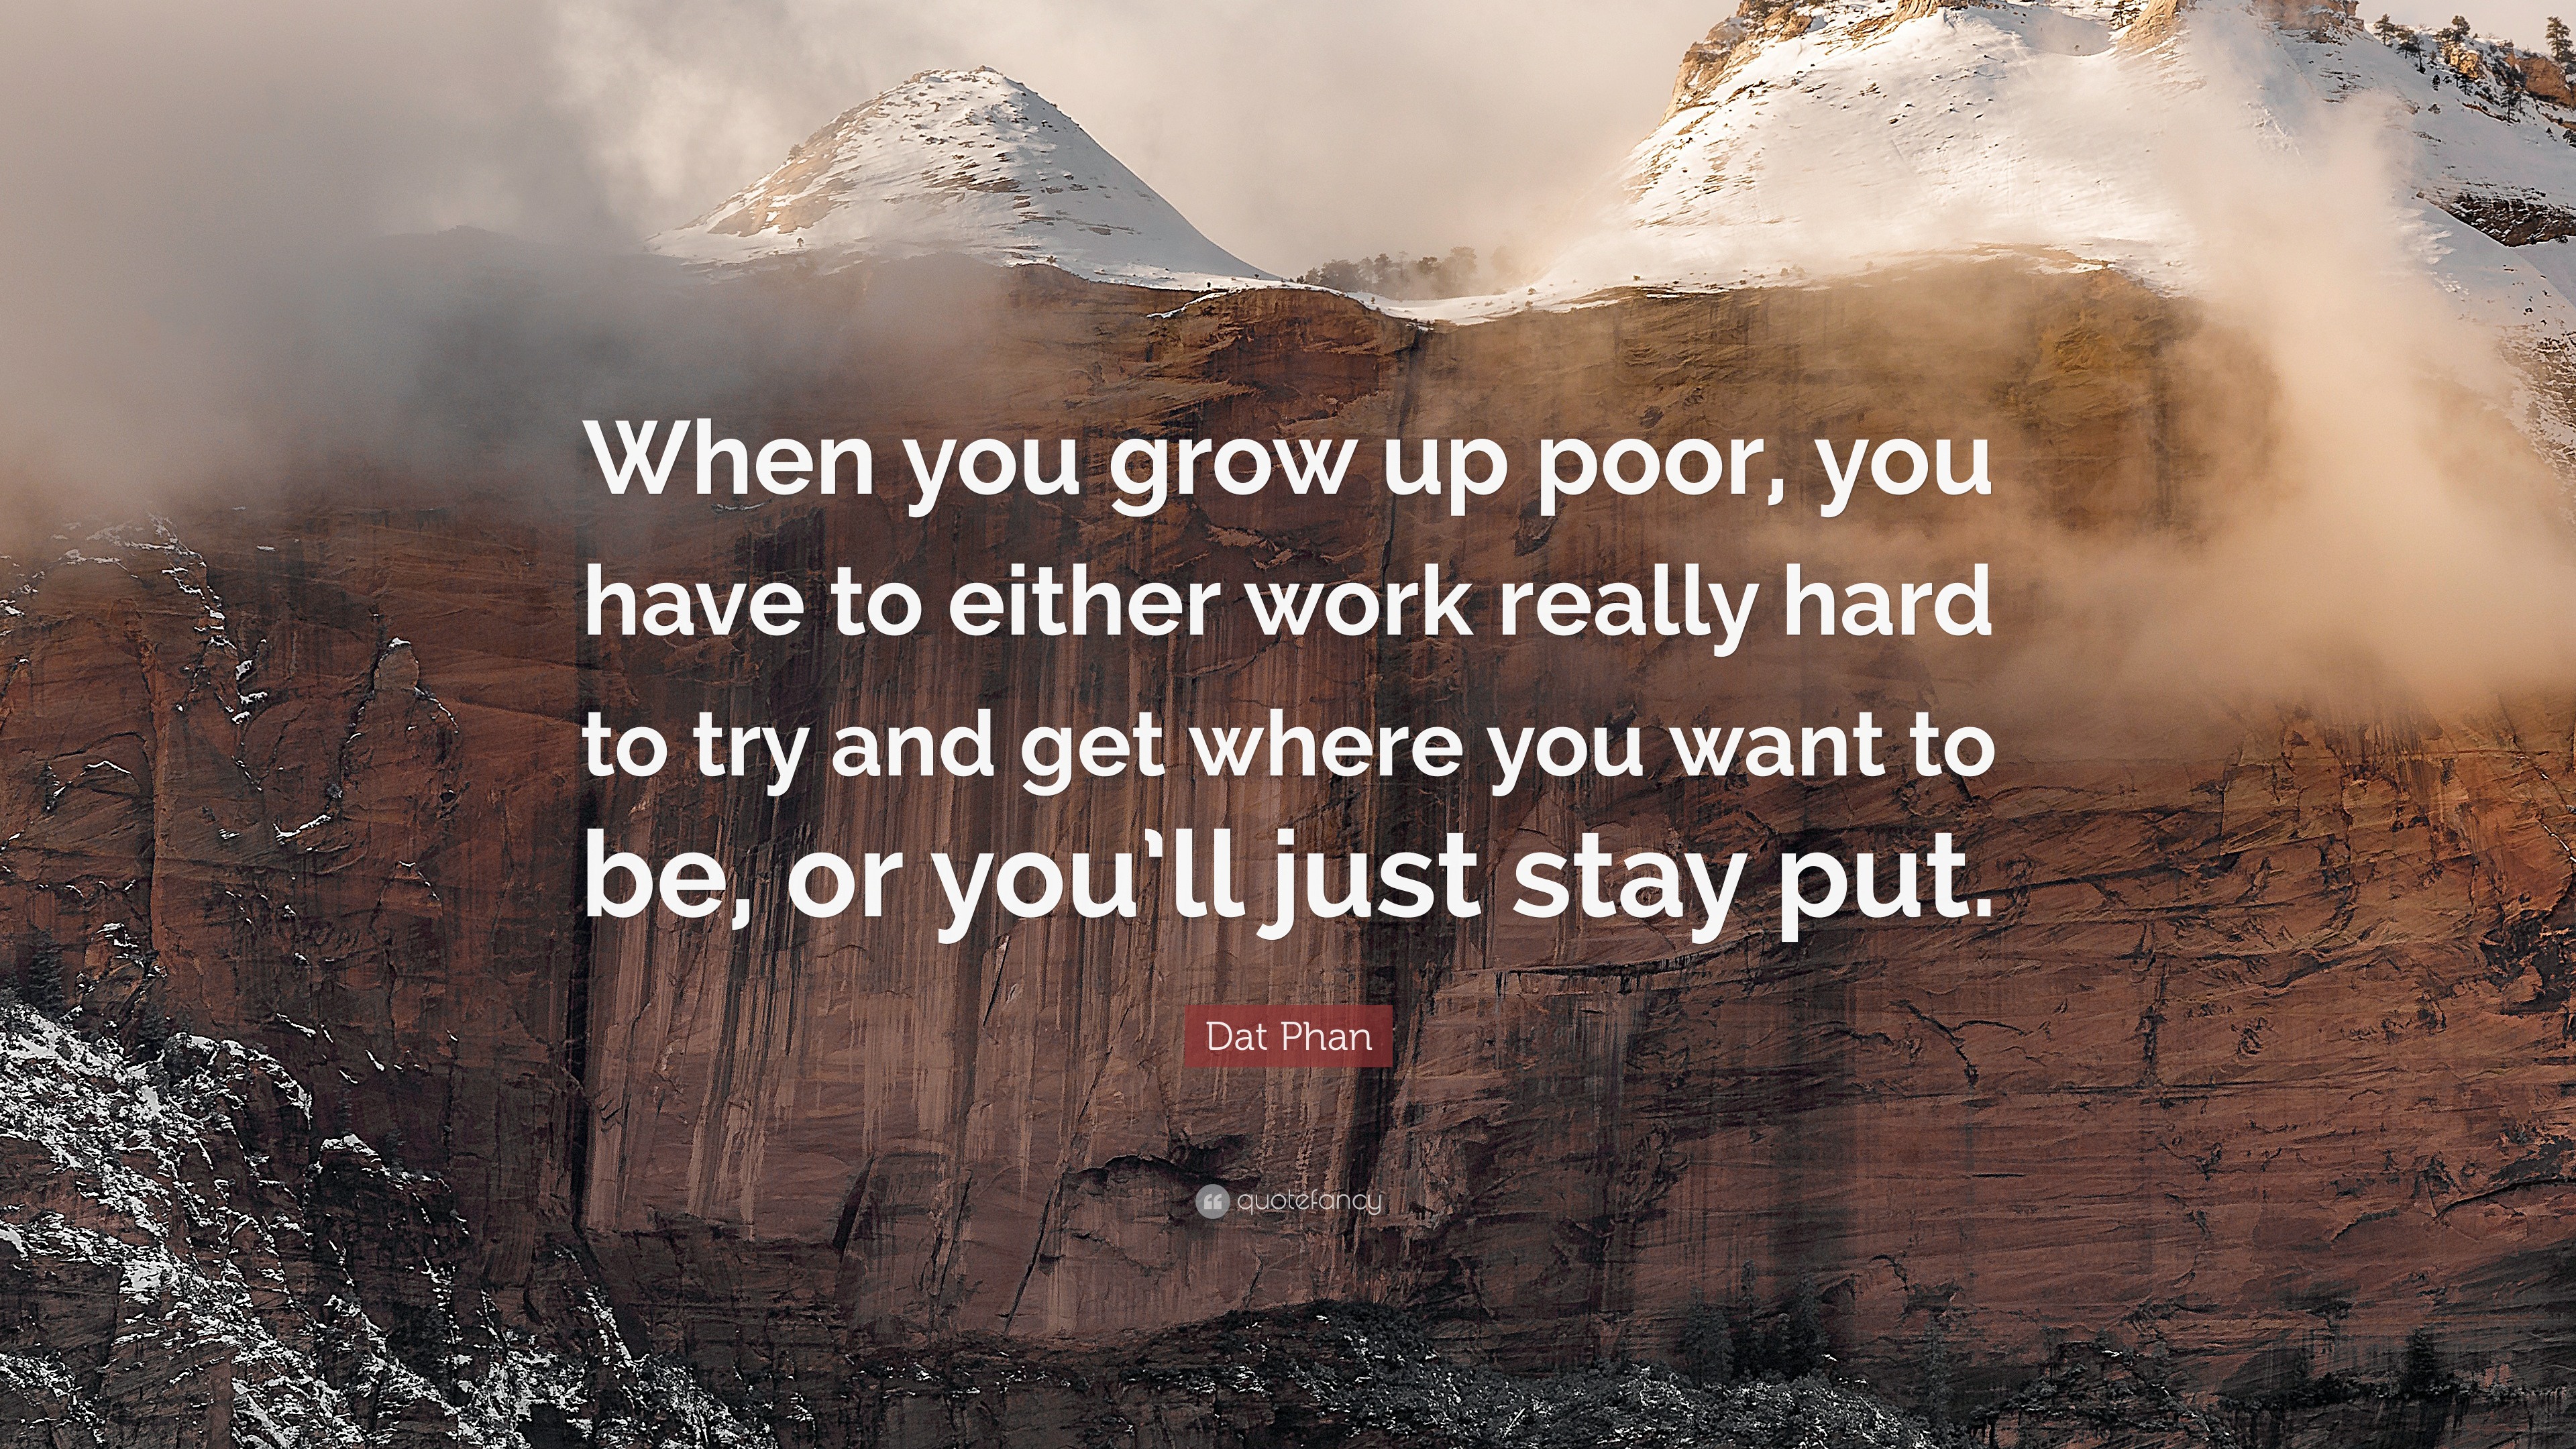 growing up poor makes you stronger